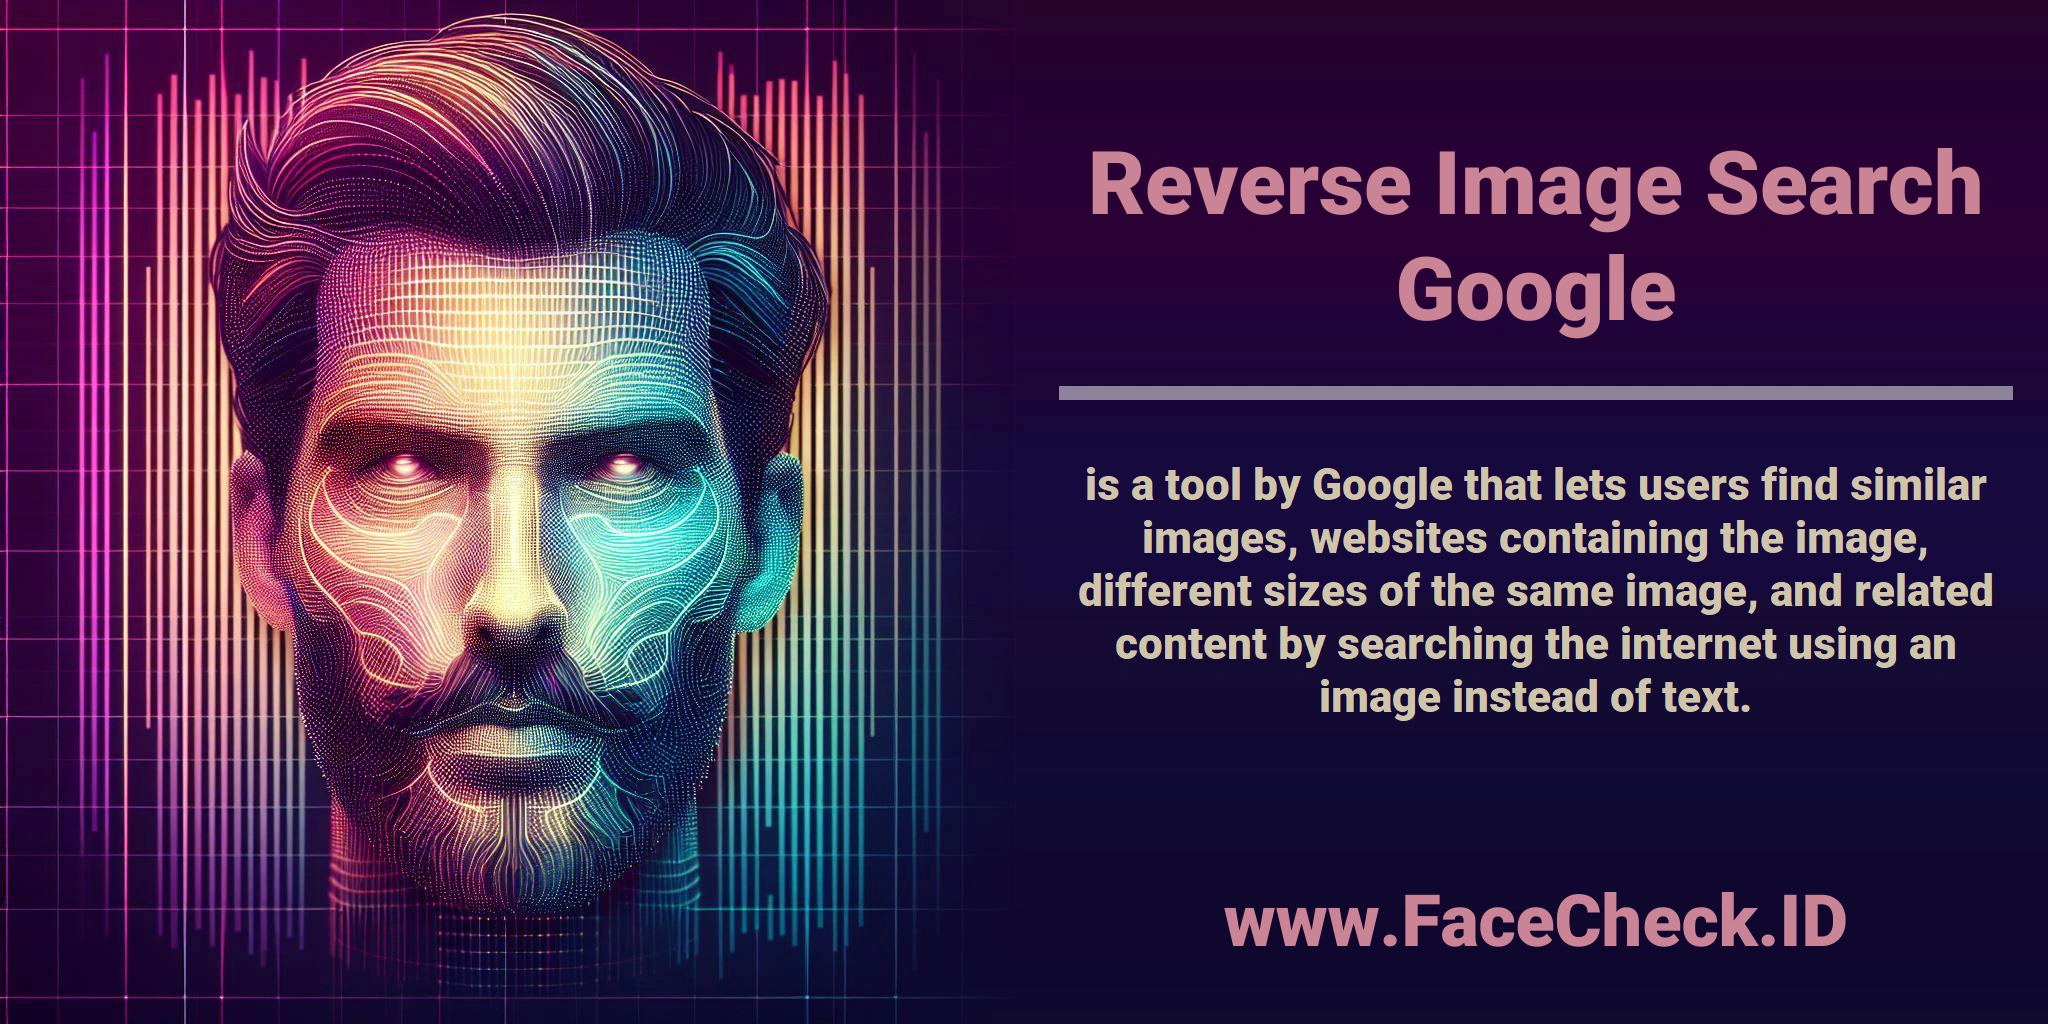 <b>Reverse Image Search Google</b> is a tool by Google that lets users find similar images, websites containing the image, different sizes of the same image, and related content by searching the internet using an image instead of text.